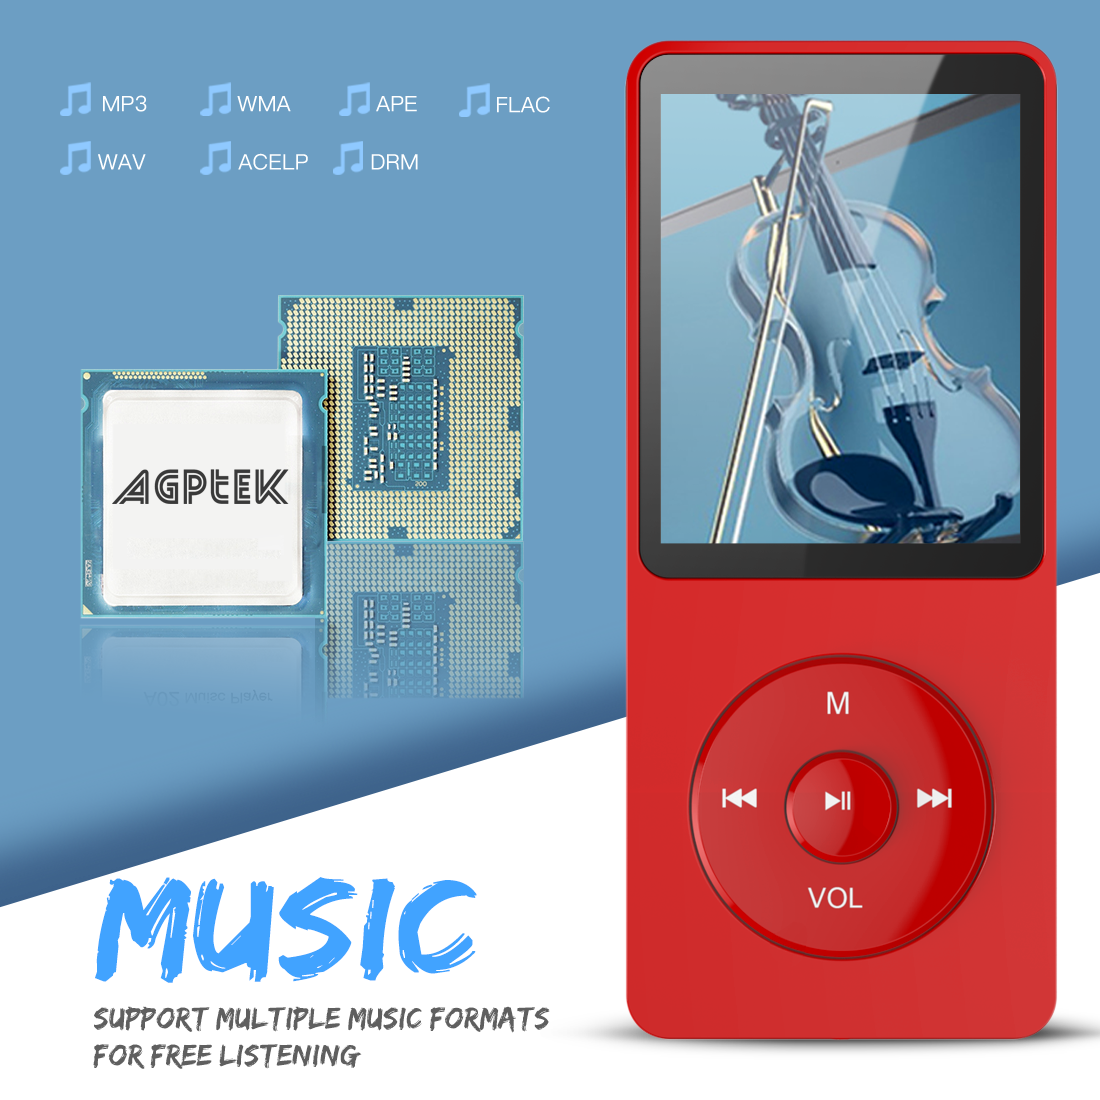 AGPTEK MP3 Player, 70 Hours Playback Lossless Sound Music Player, A02 8GB Rose Gold/Dark Blue/Black/Red - image 4 of 9